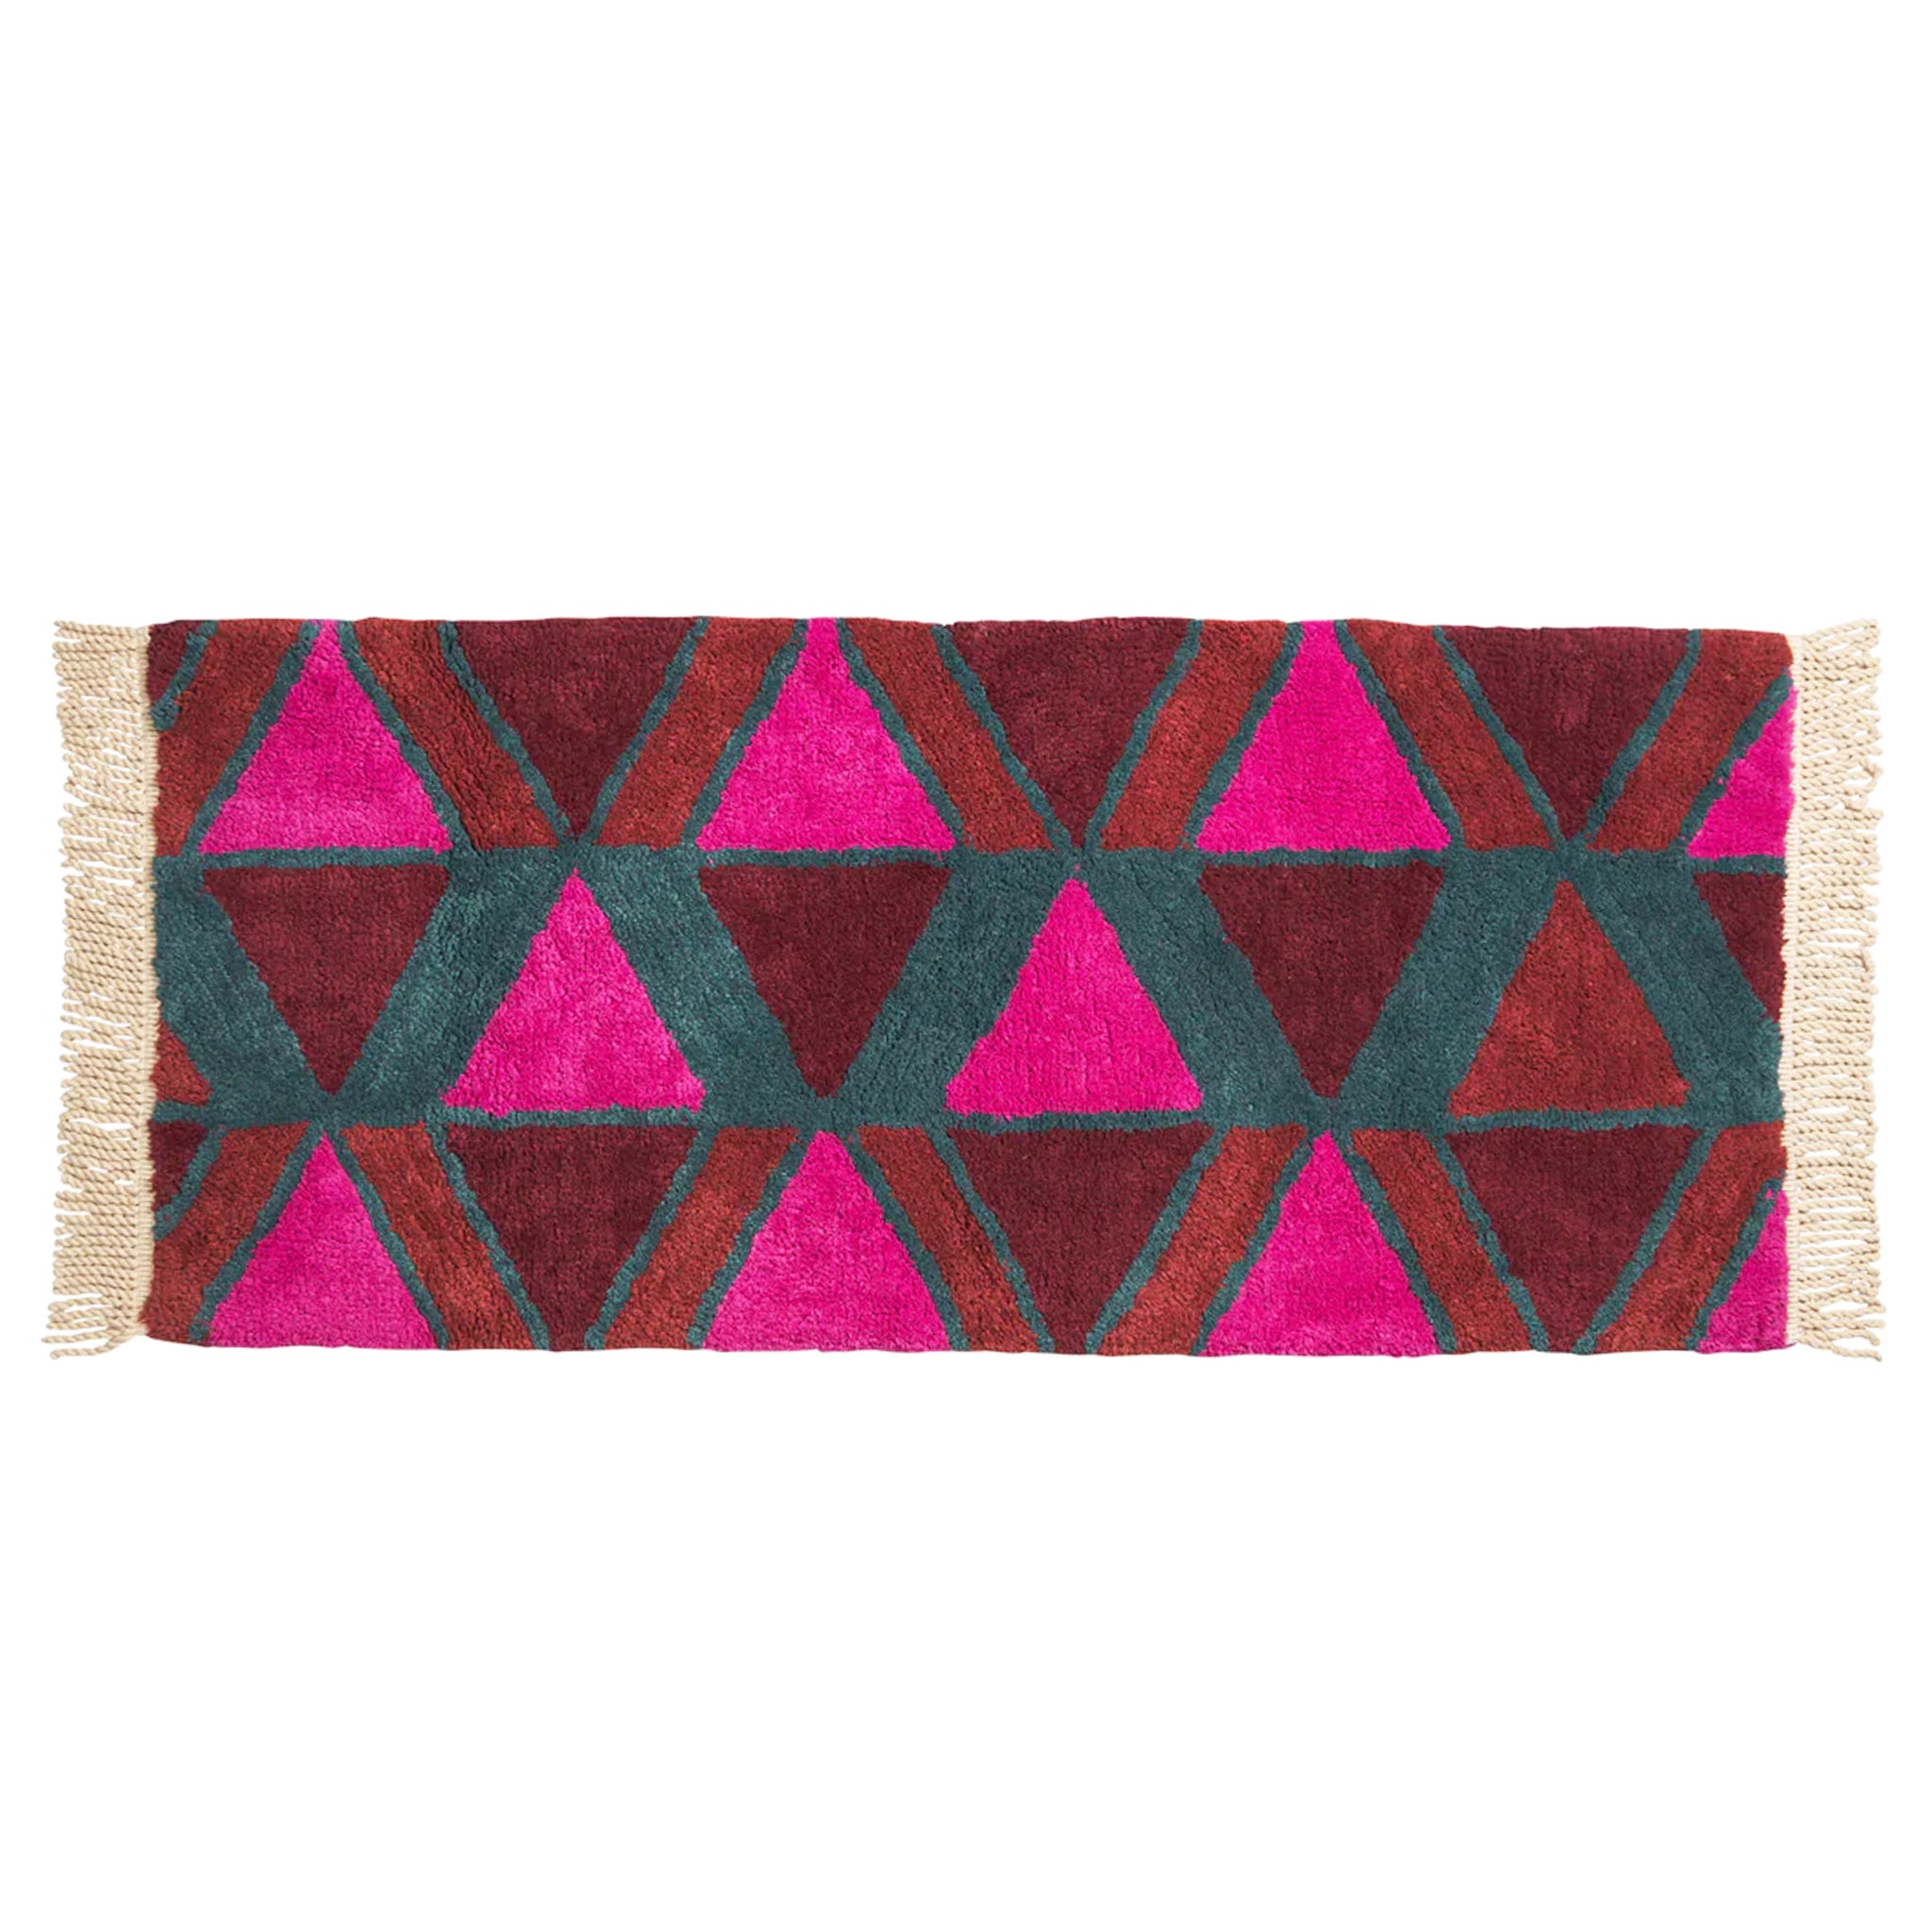 A pink, red, rust and teal triangle patterned bath mat with tassel details on the two ends.